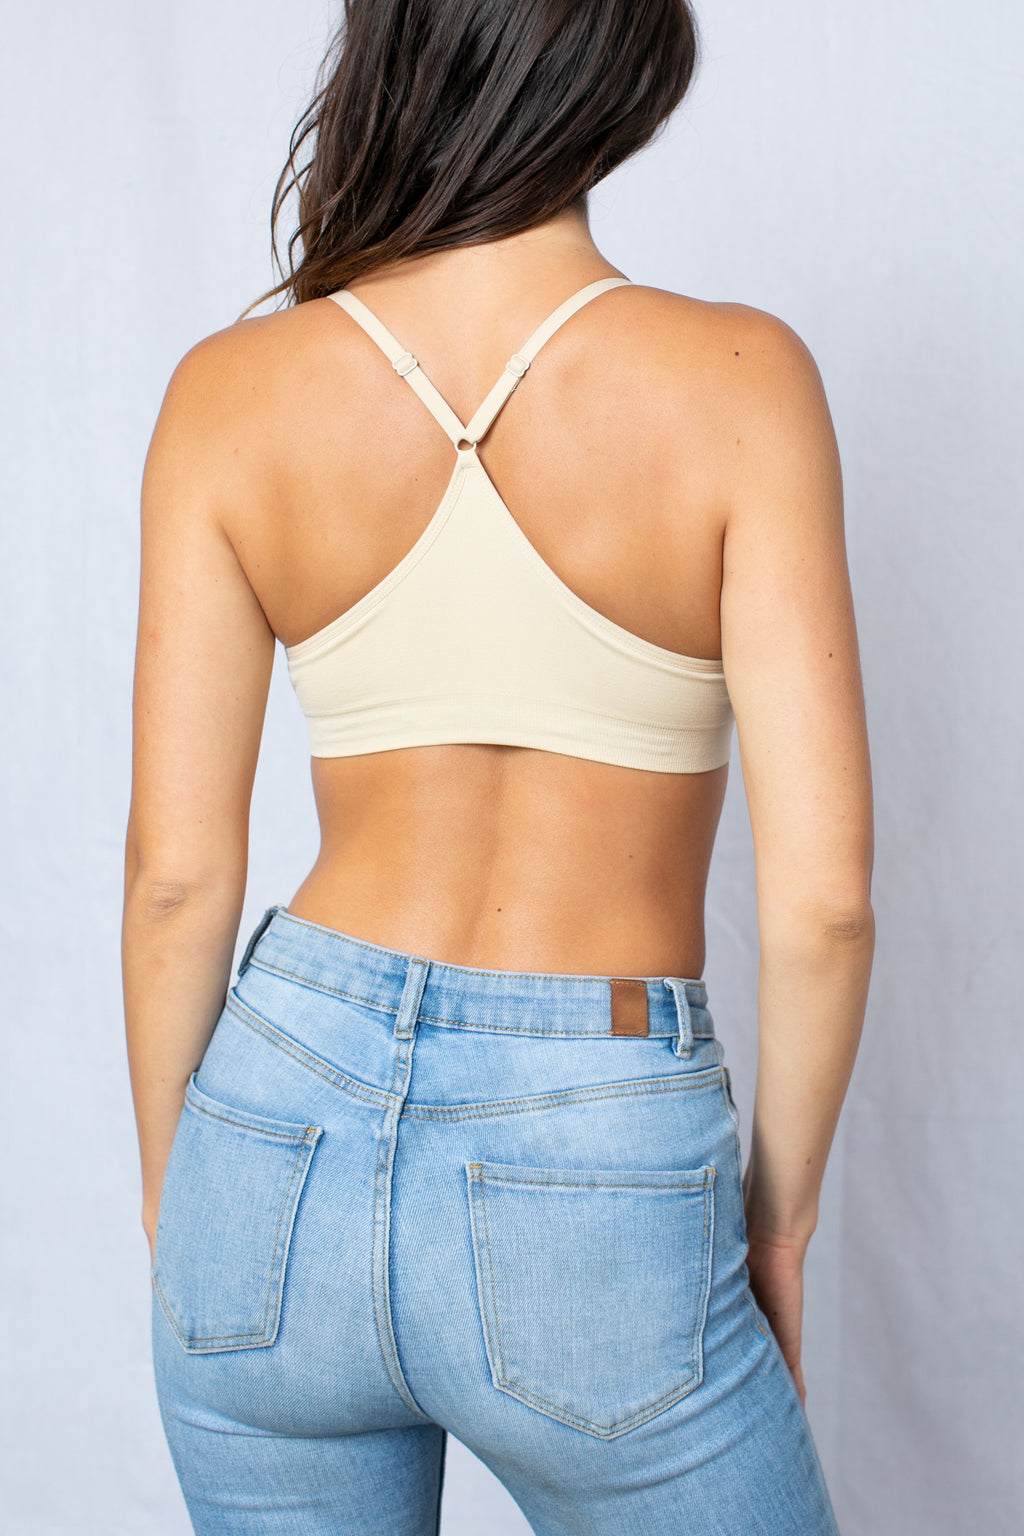 Blue 55 Collections, Bralettes: Lace, Racerback & More